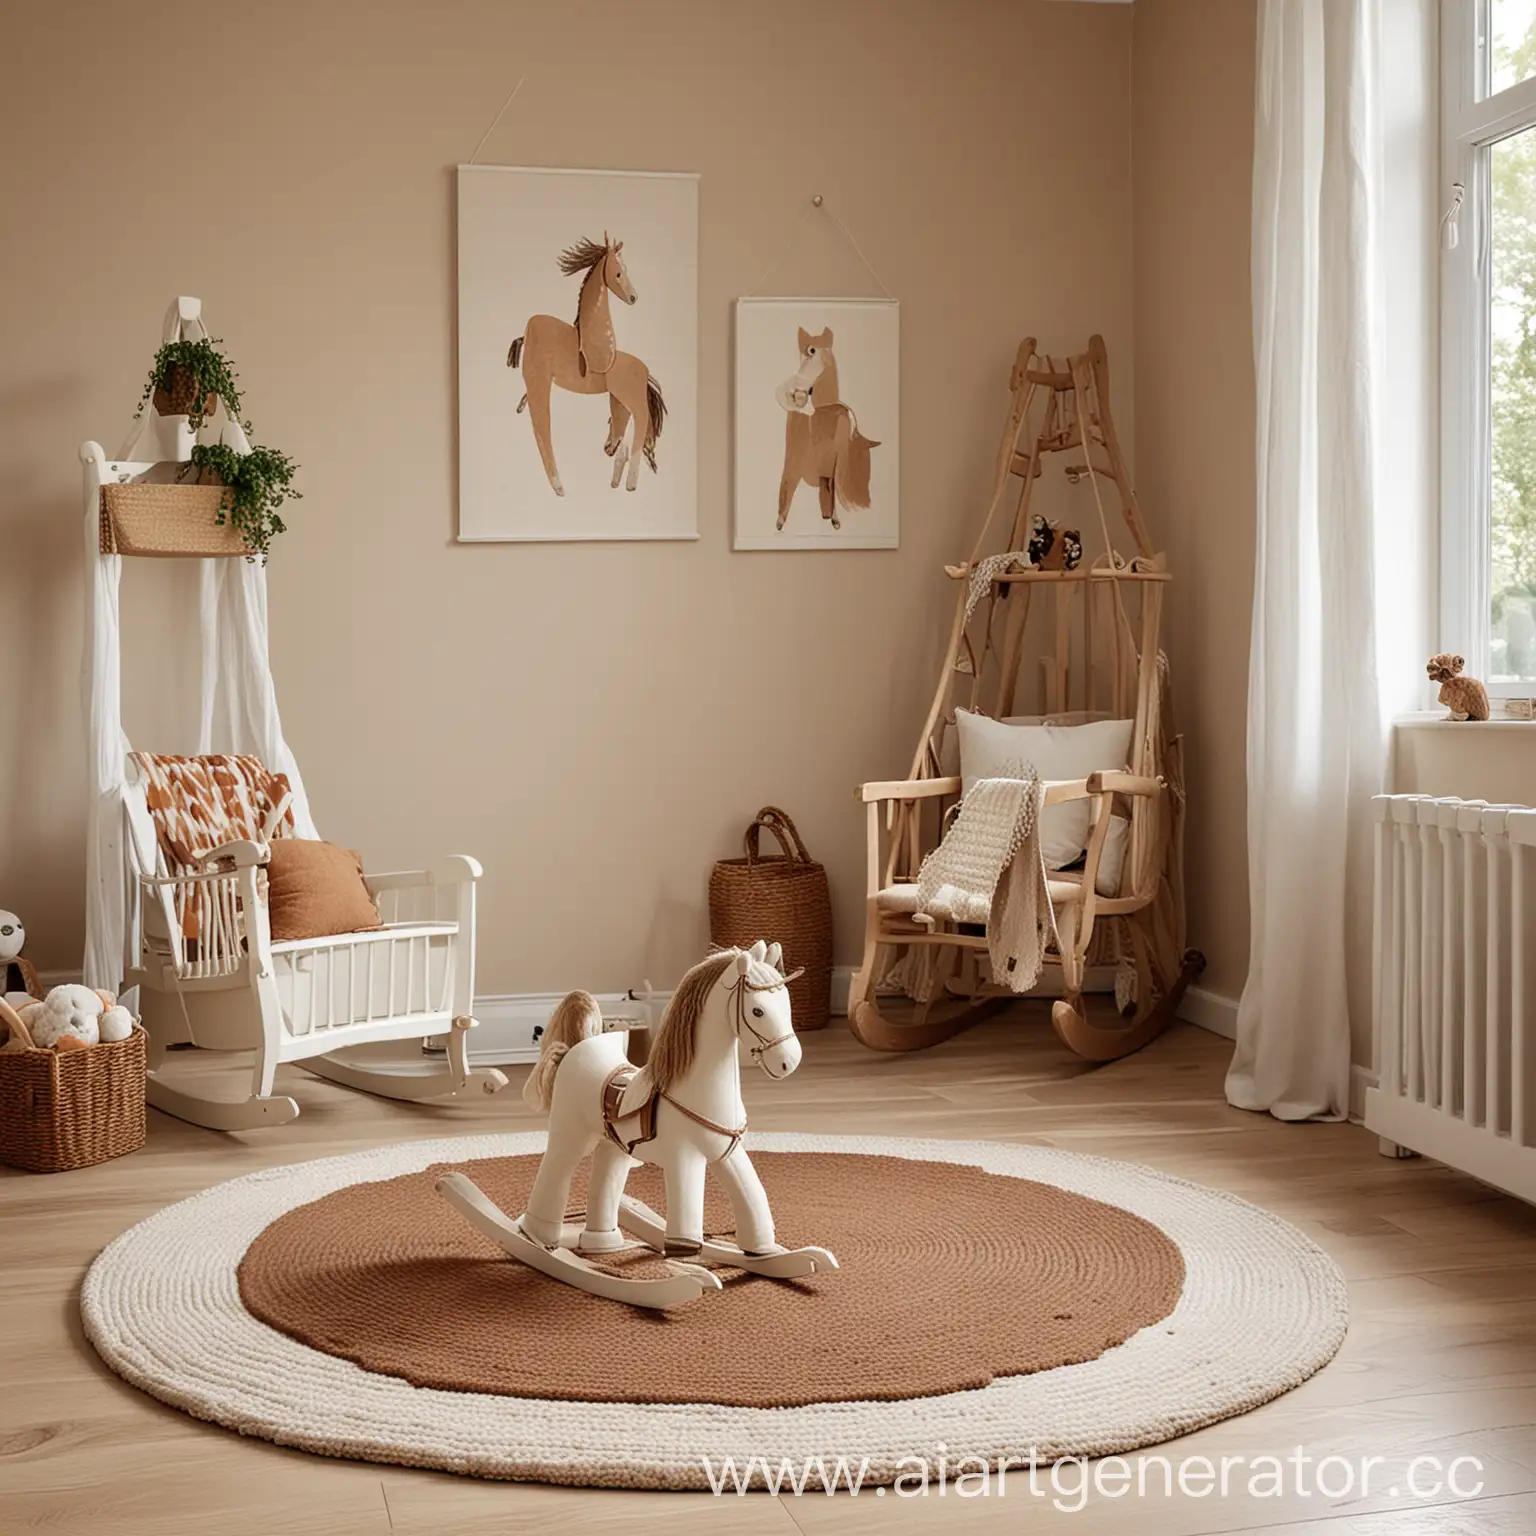 Childrens-Room-in-Beige-Tones-with-White-Rocking-Horse-and-Brown-Round-Rug